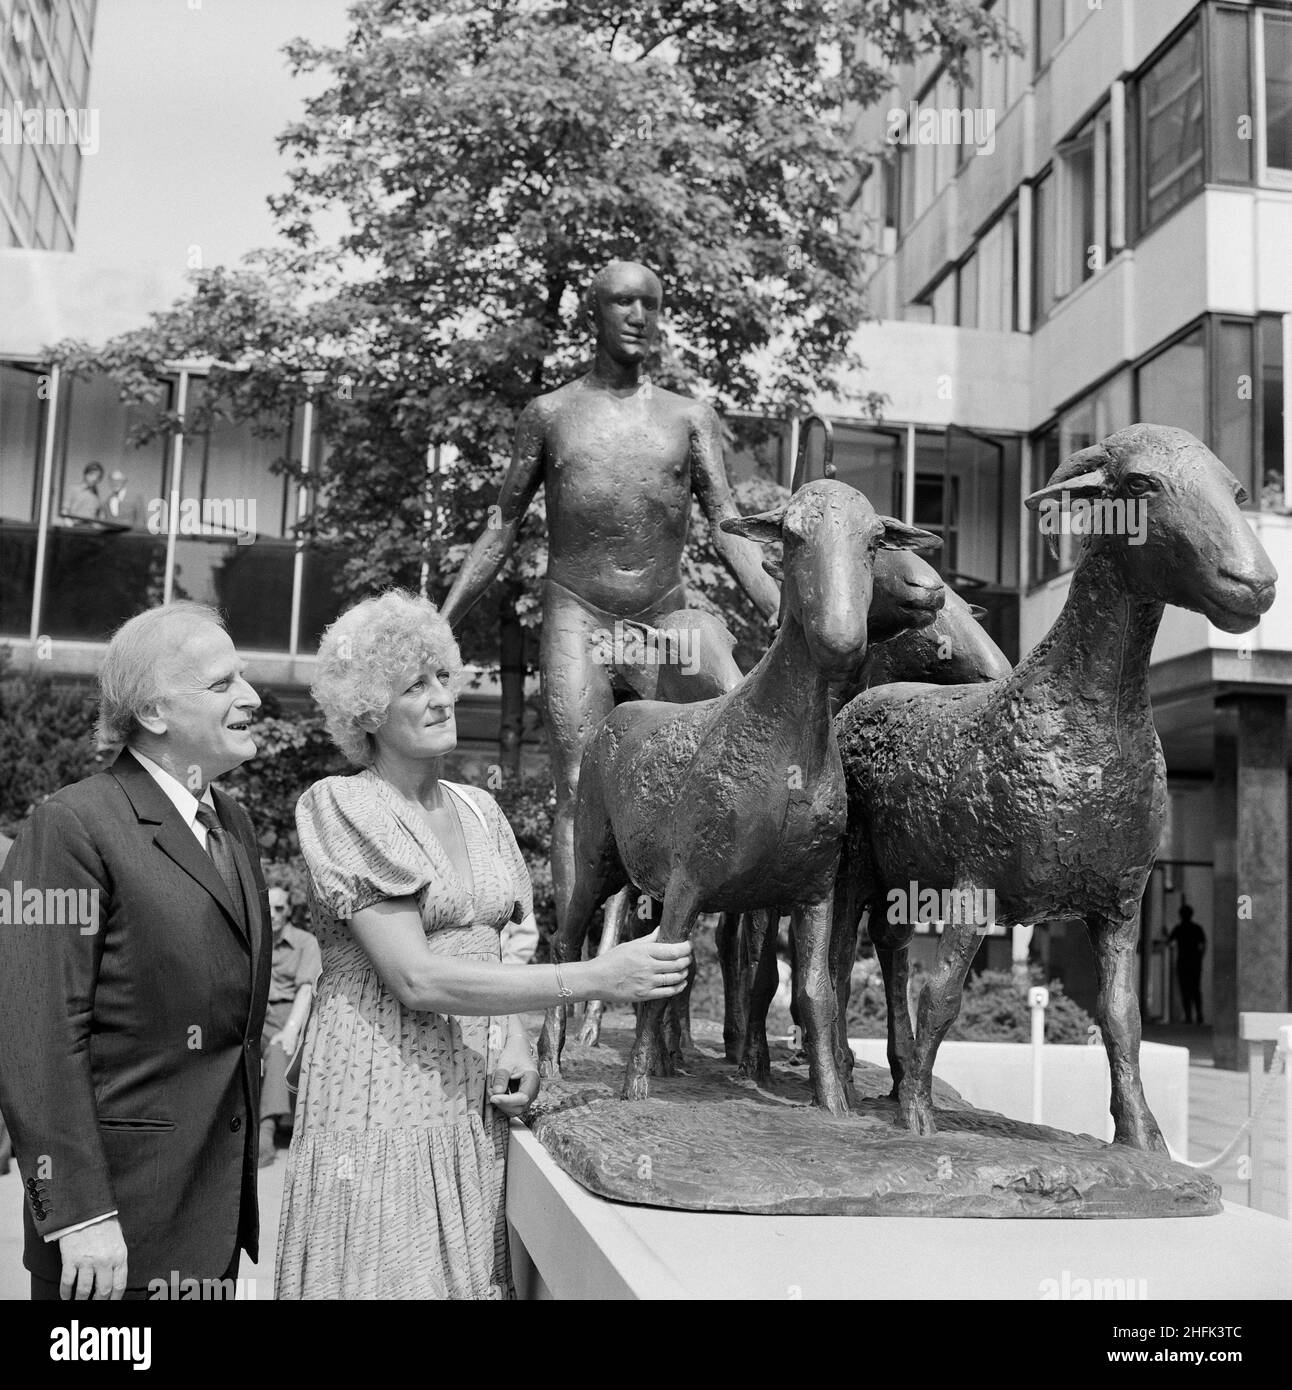 Paternoster Square, City of London, 30/07/1975. Violinist Yehudi Menuhin admiring a bronze sculpture of a shepherd and sheep by Elisabeth Frink (pictured), on the day it was unveiled at the Paternoster development. Work on the Paternoster development in the 1960's was carried out in a joint venture by John Laing Construction Limited, Trollope and Colls Limited, and George Wimpey and Company Limited. The development consisted of a series of office blocks, a shopping precinct, an extensive piazza and a three-level car park. In July 1975, a bronze statue of a shepherd and his sheep, sculpted by E Stock Photo